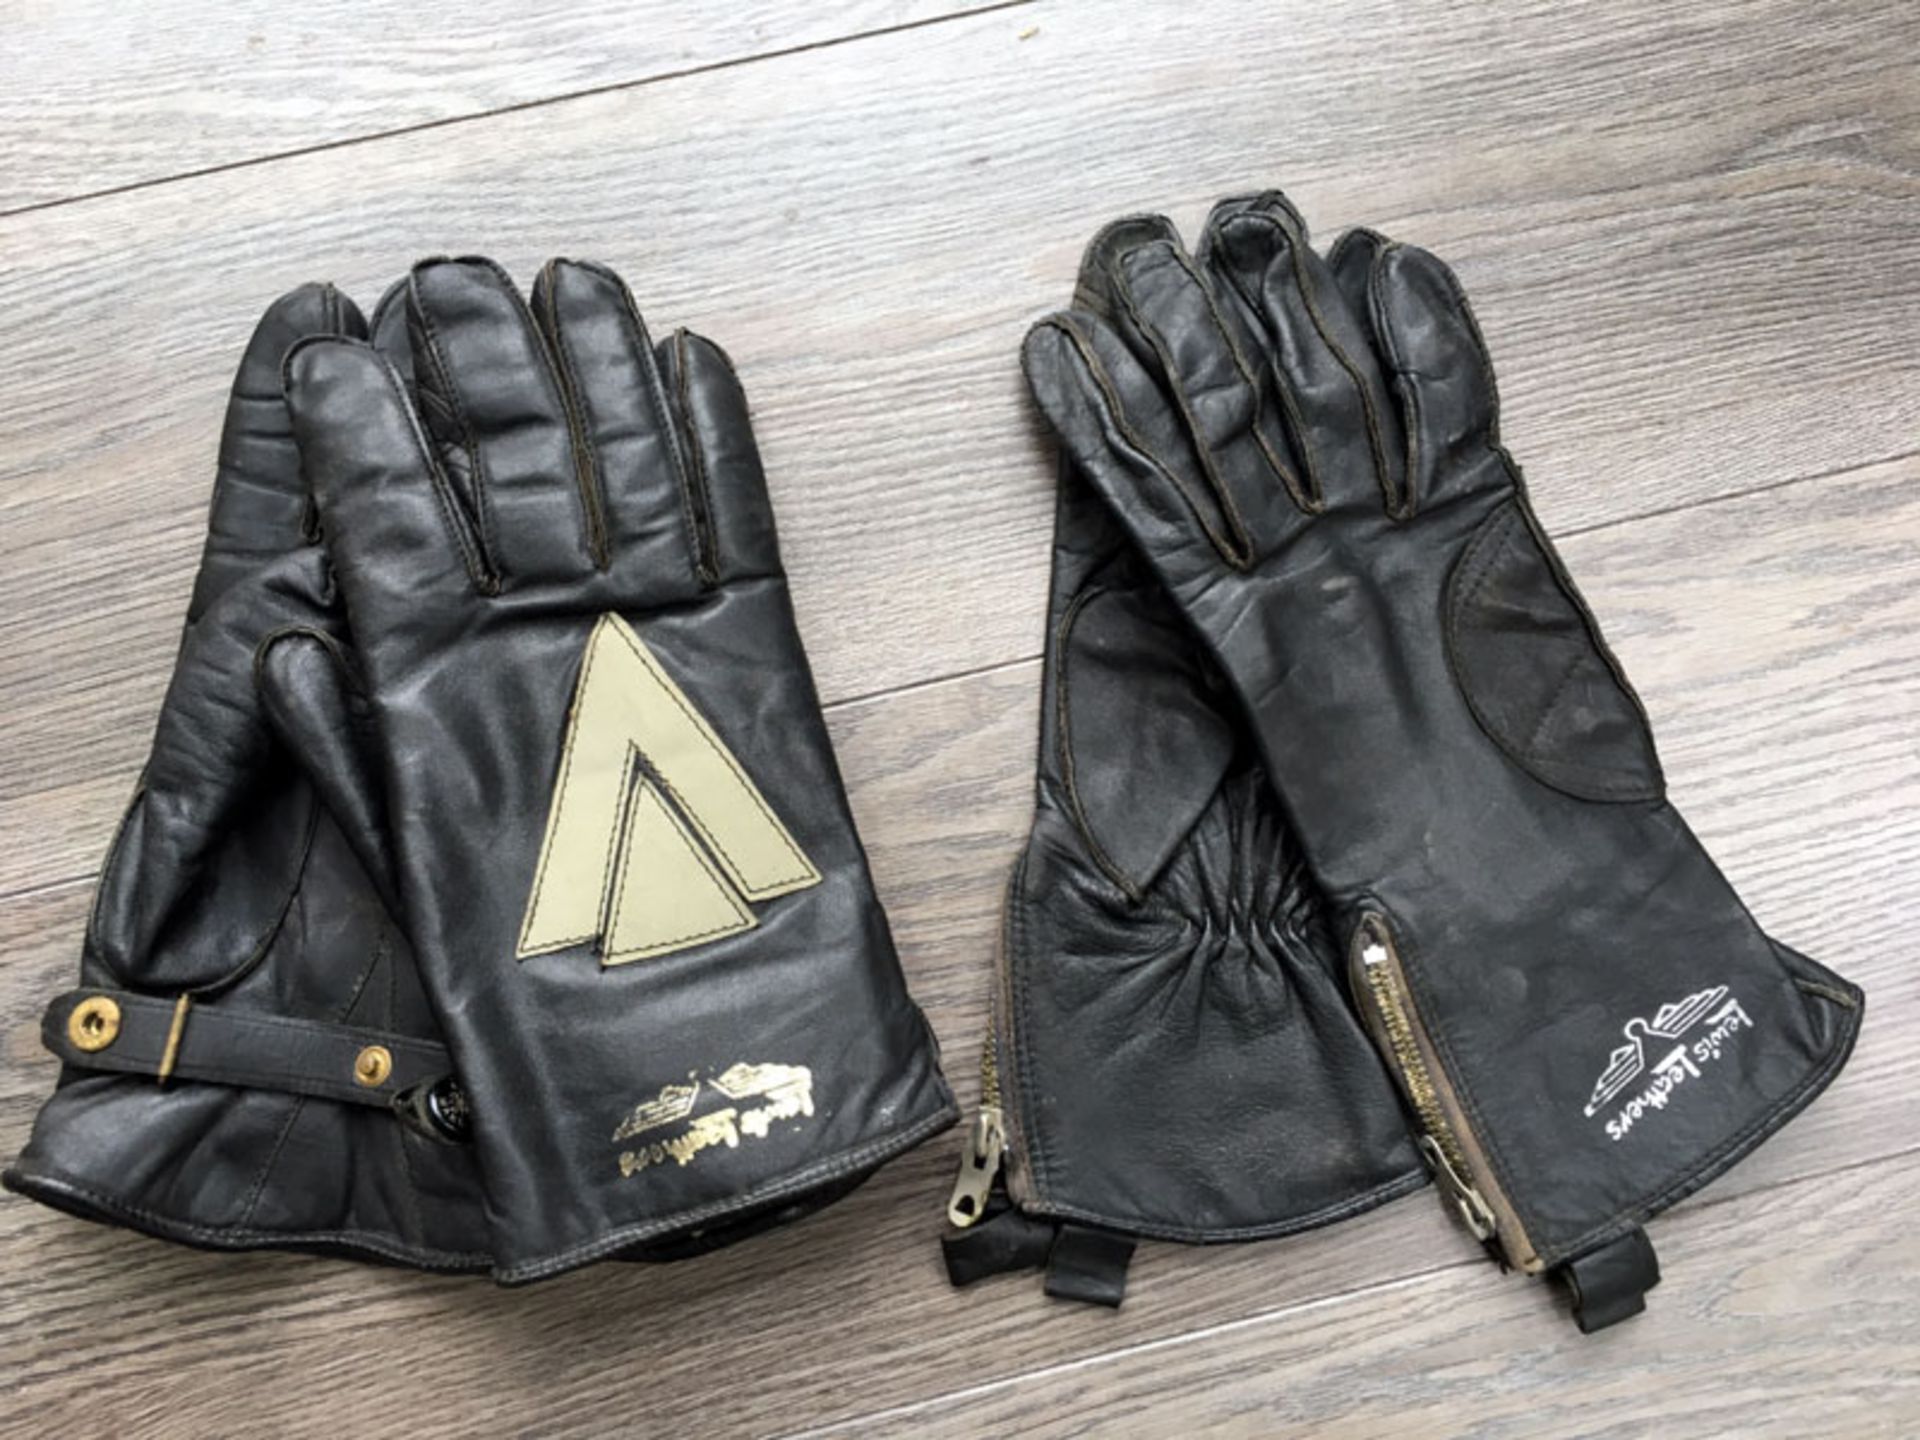 Lewis Leathers Motorcycling Gloves